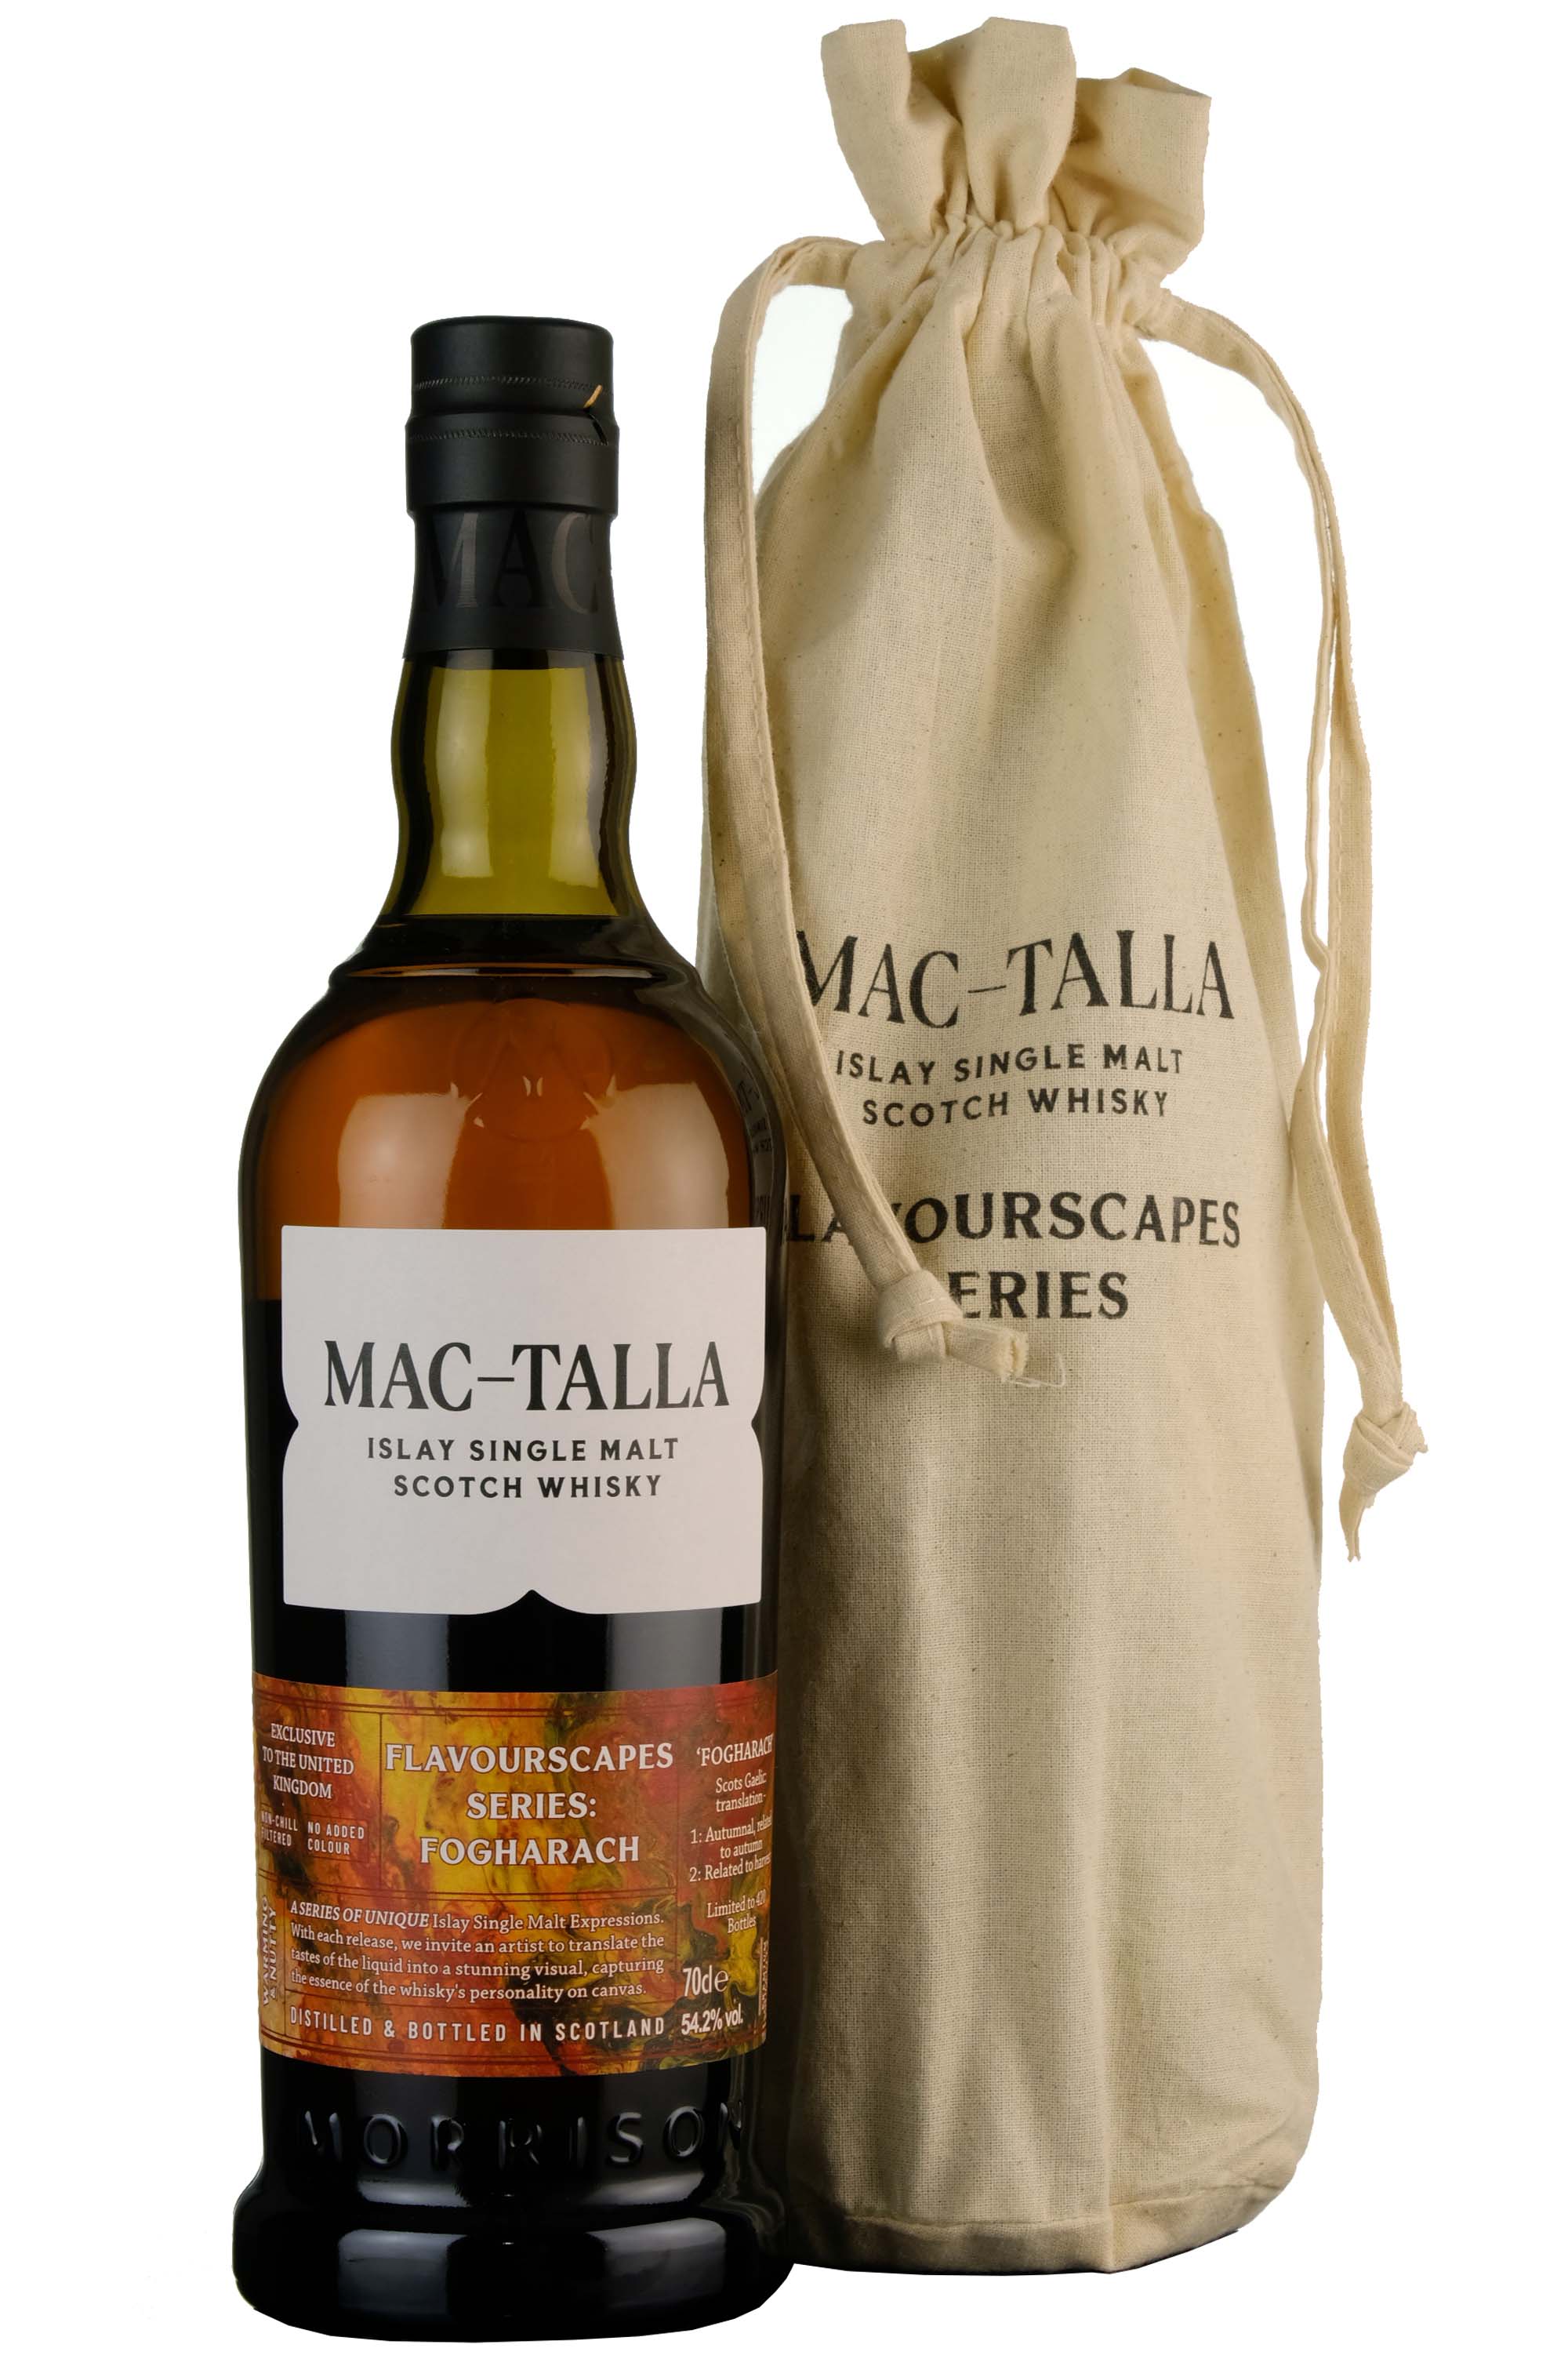 Mac-Talla Flavourscapes Series Fogharach UK Exclusive Bottled 2023